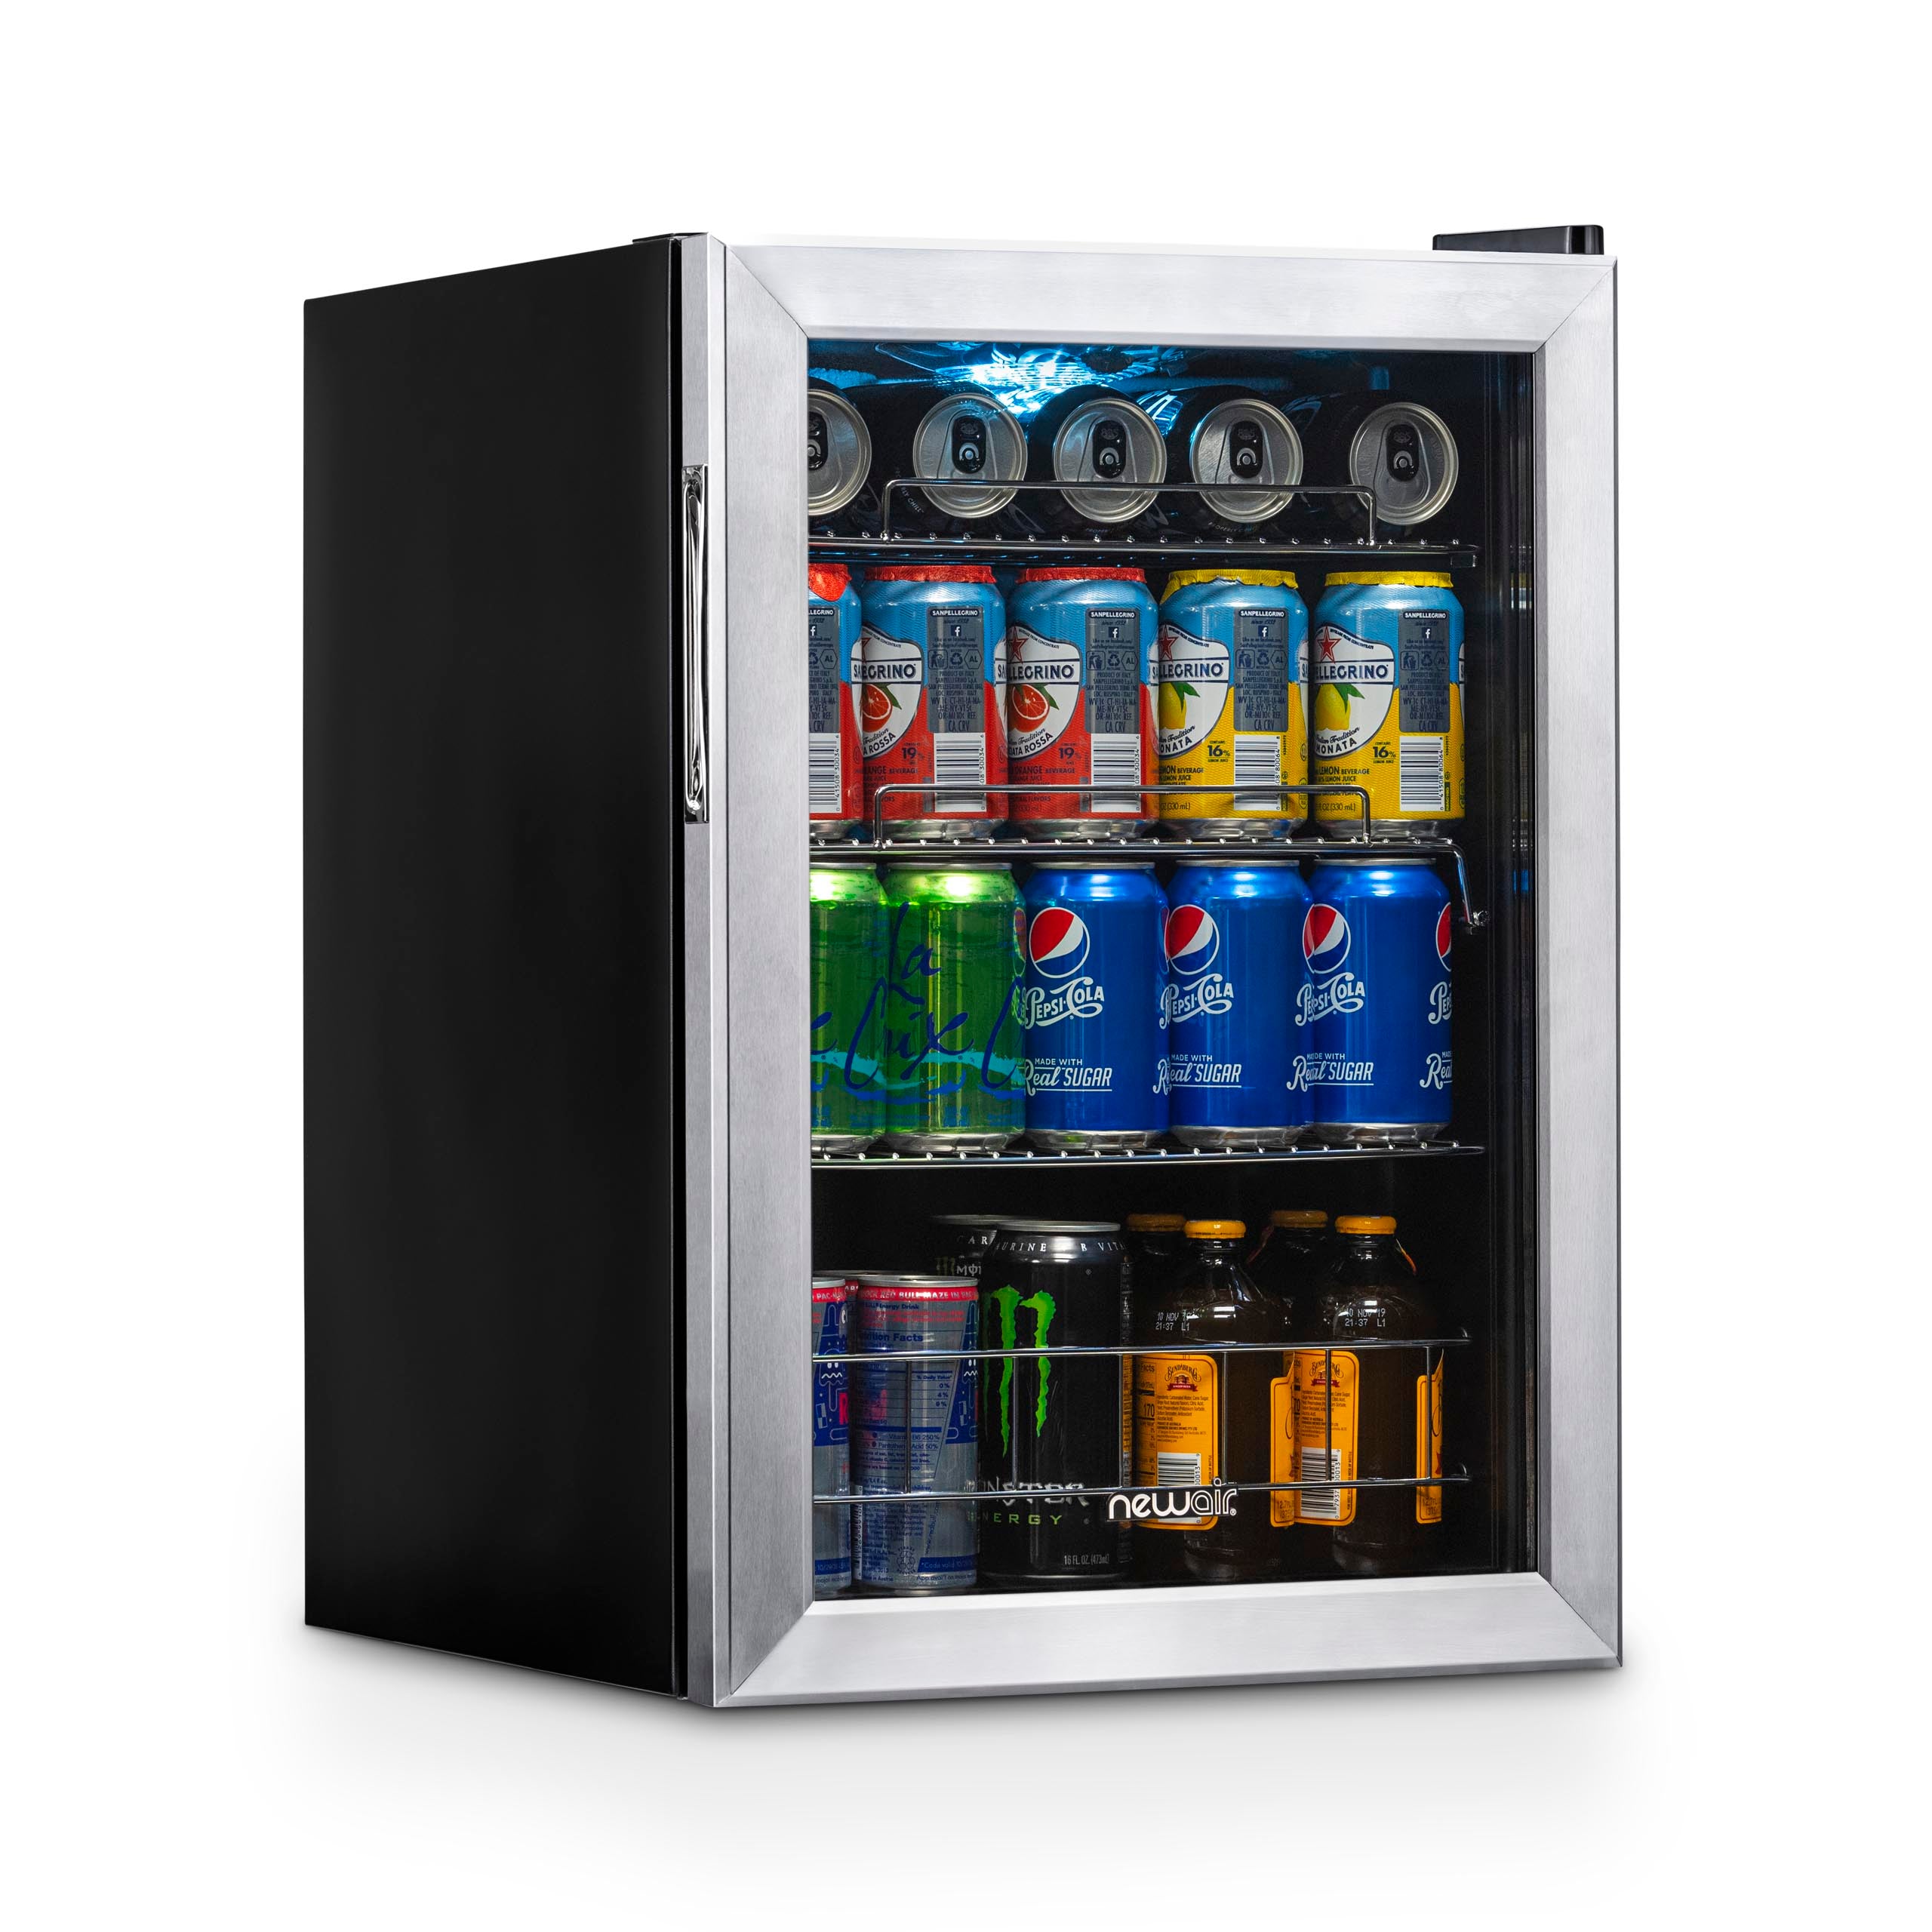 NewAir AB-850 84-Can Stainless Steel Beverage Cooler